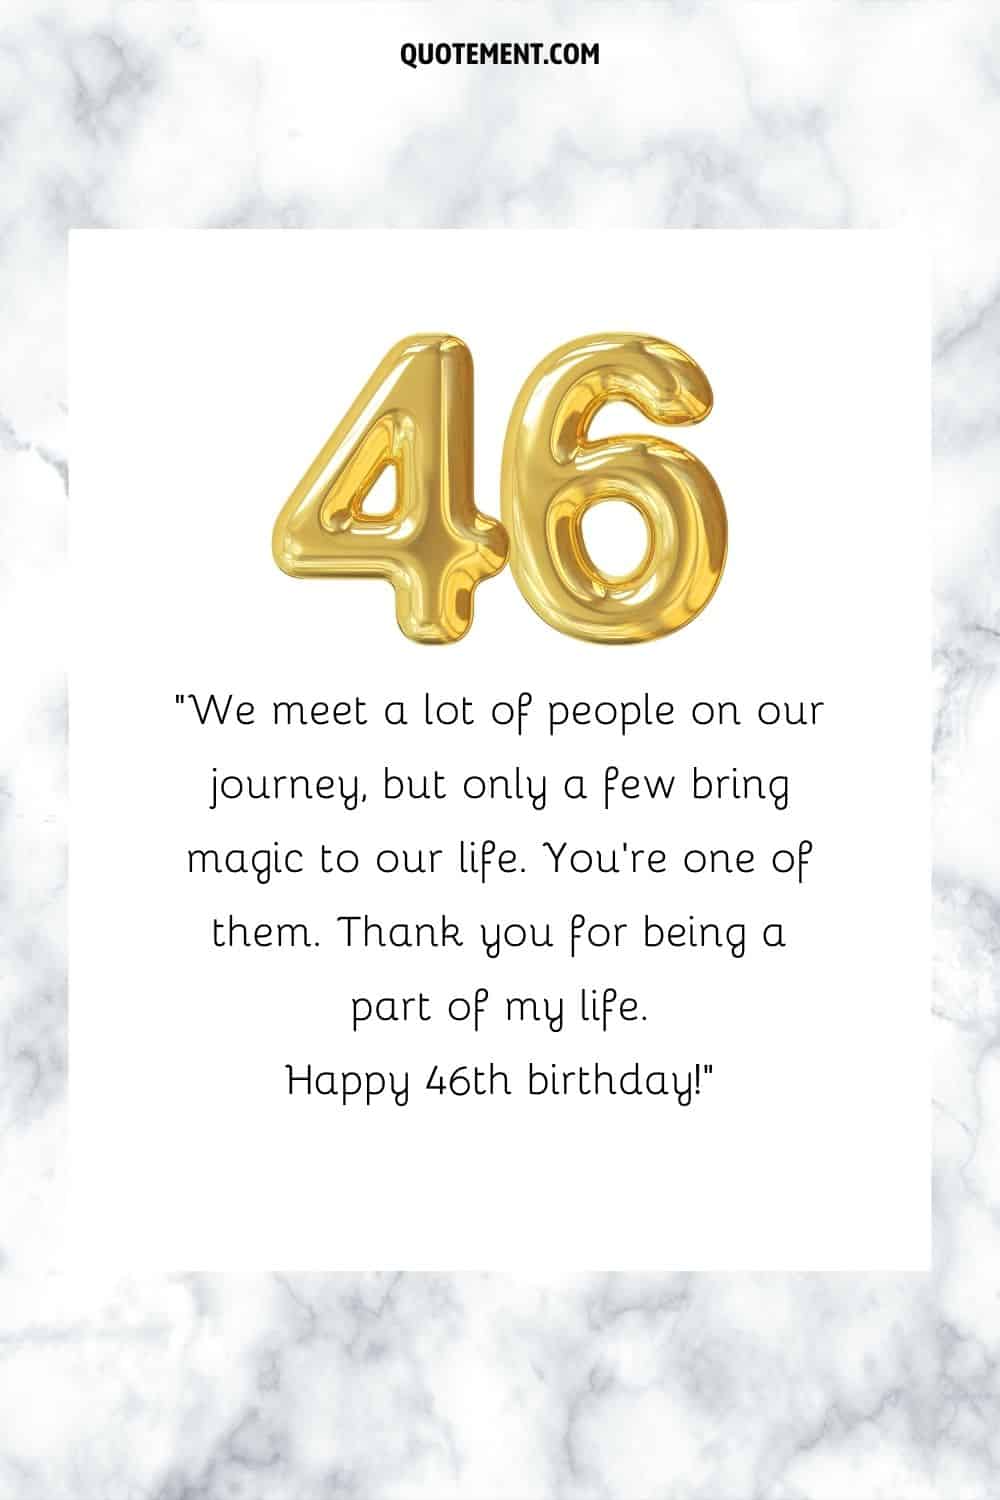 Happy 46th birthday message and balloon number.